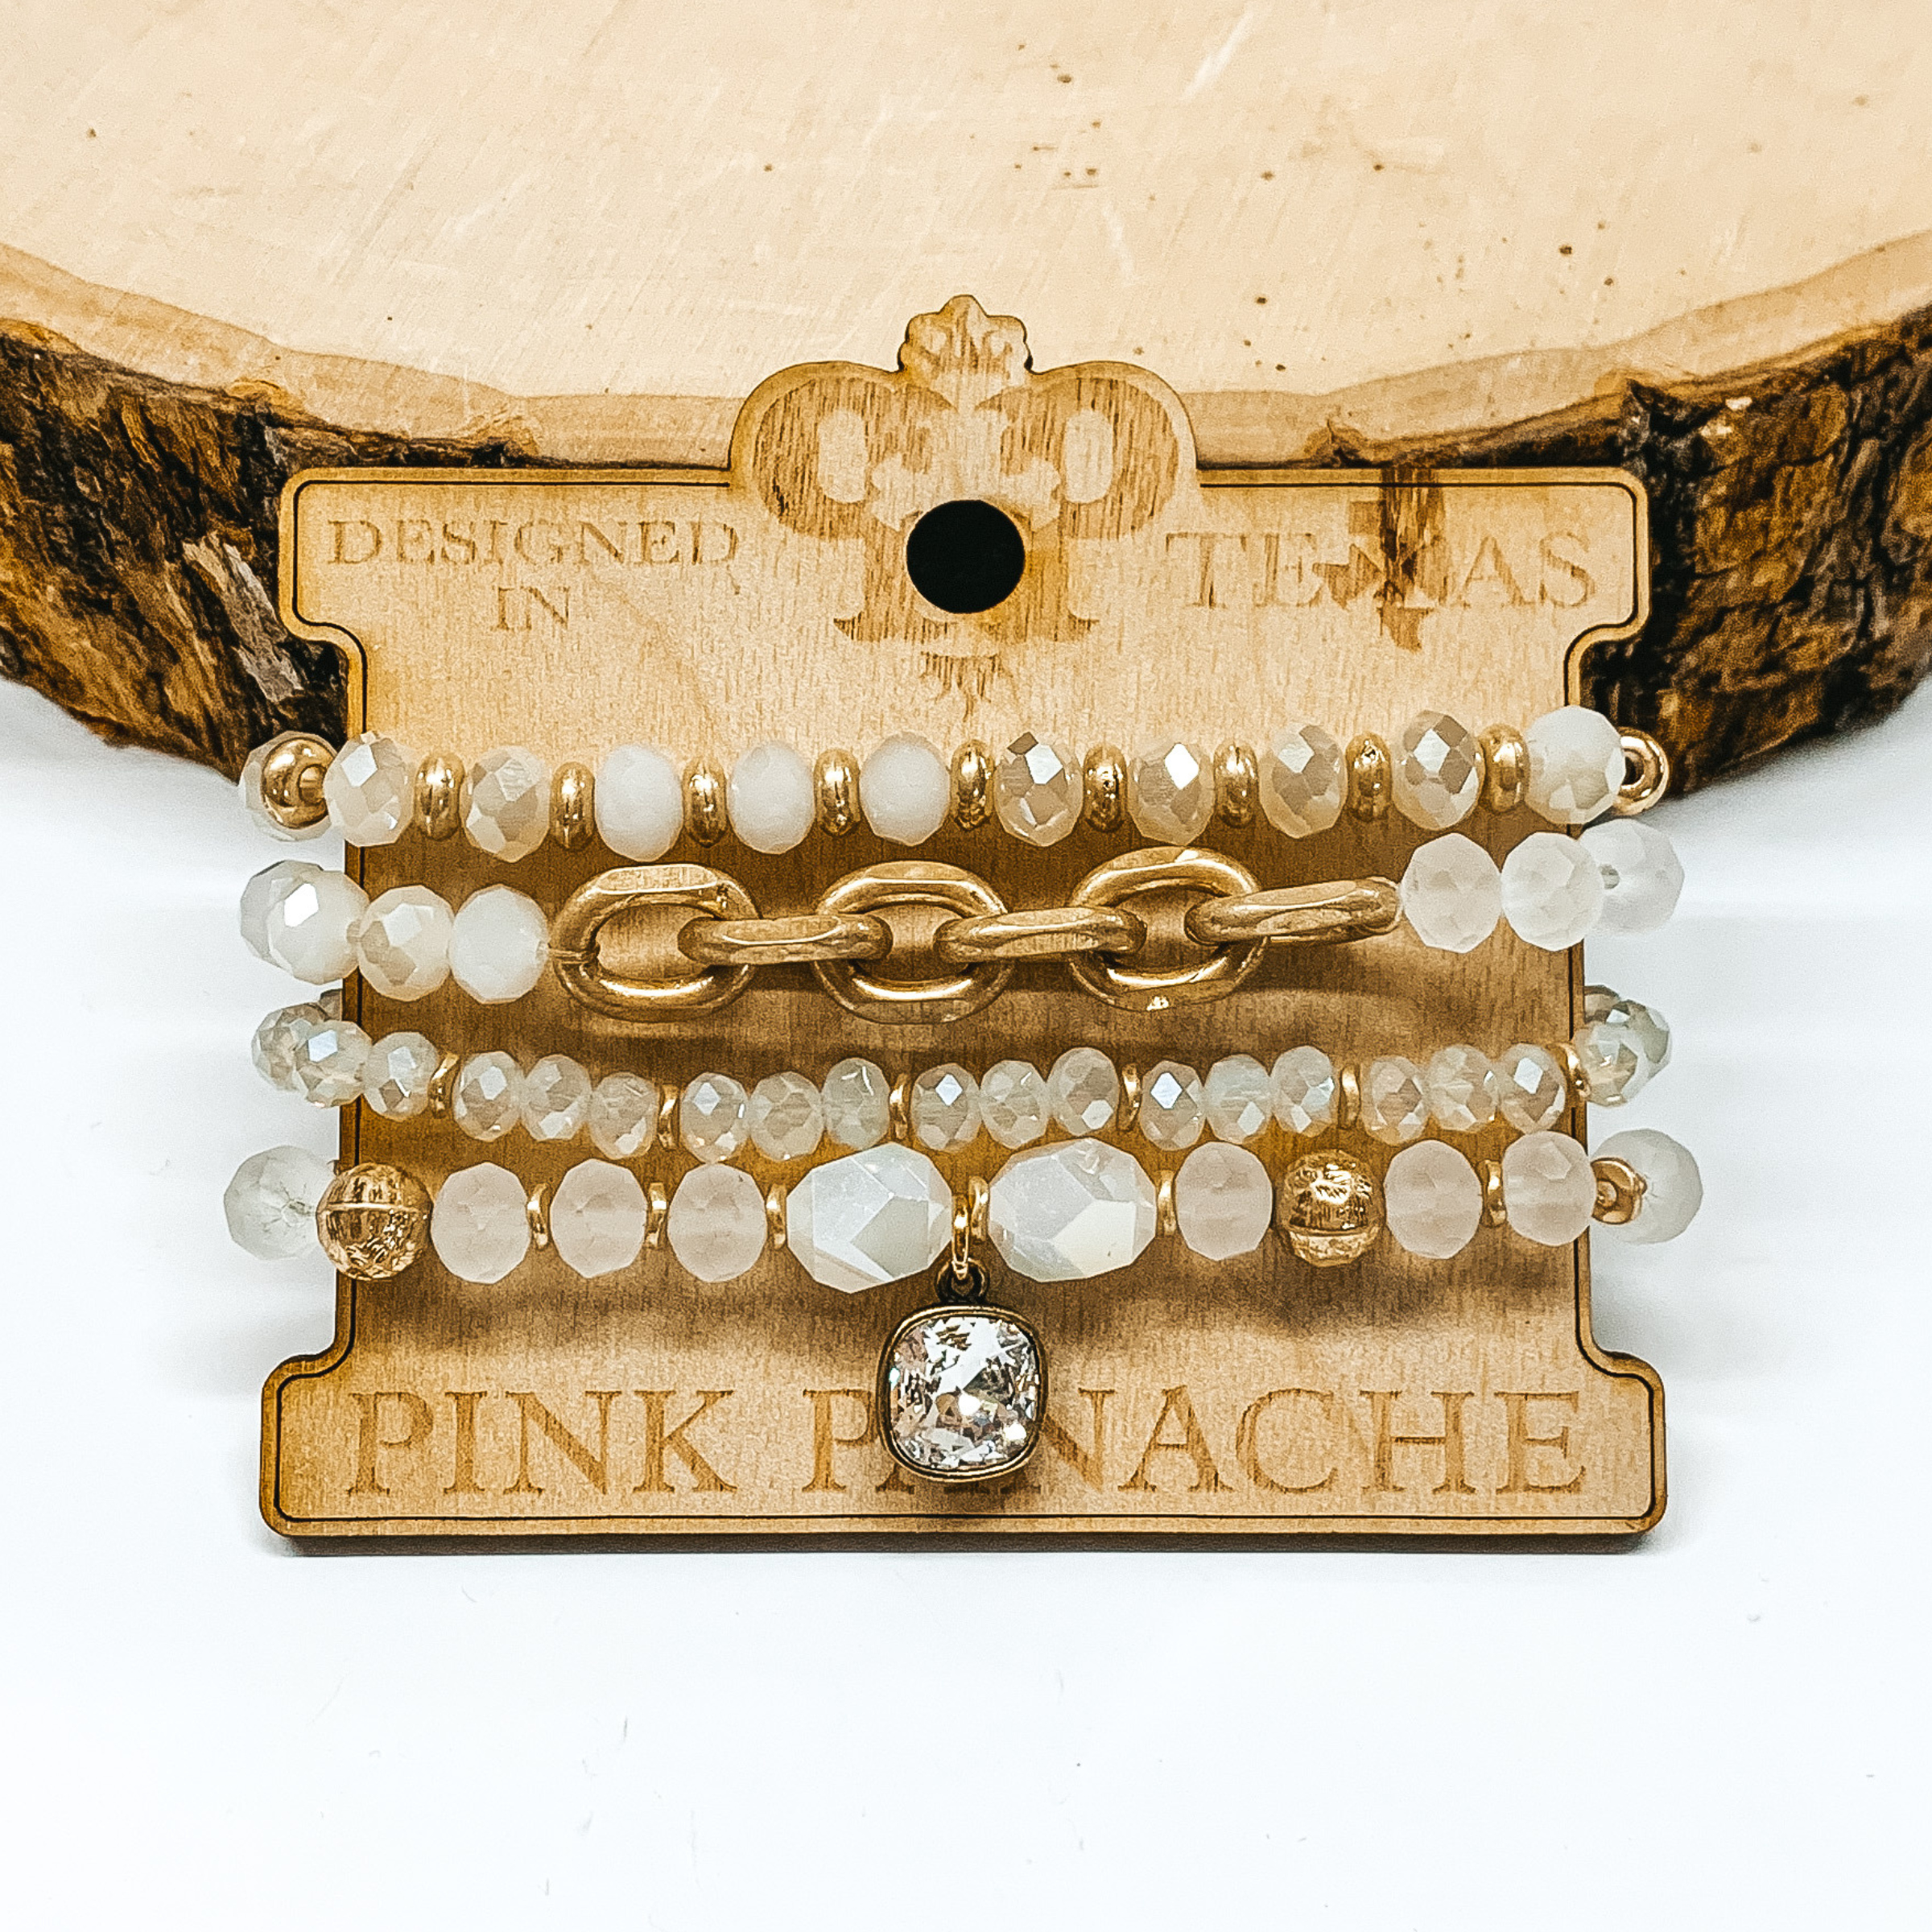 Pink Panache | White Crystal and Gold Tone Beaded Bracelet Set with Gold Tone Chain Segment and Clear Cushion Cut Crystal Pendant